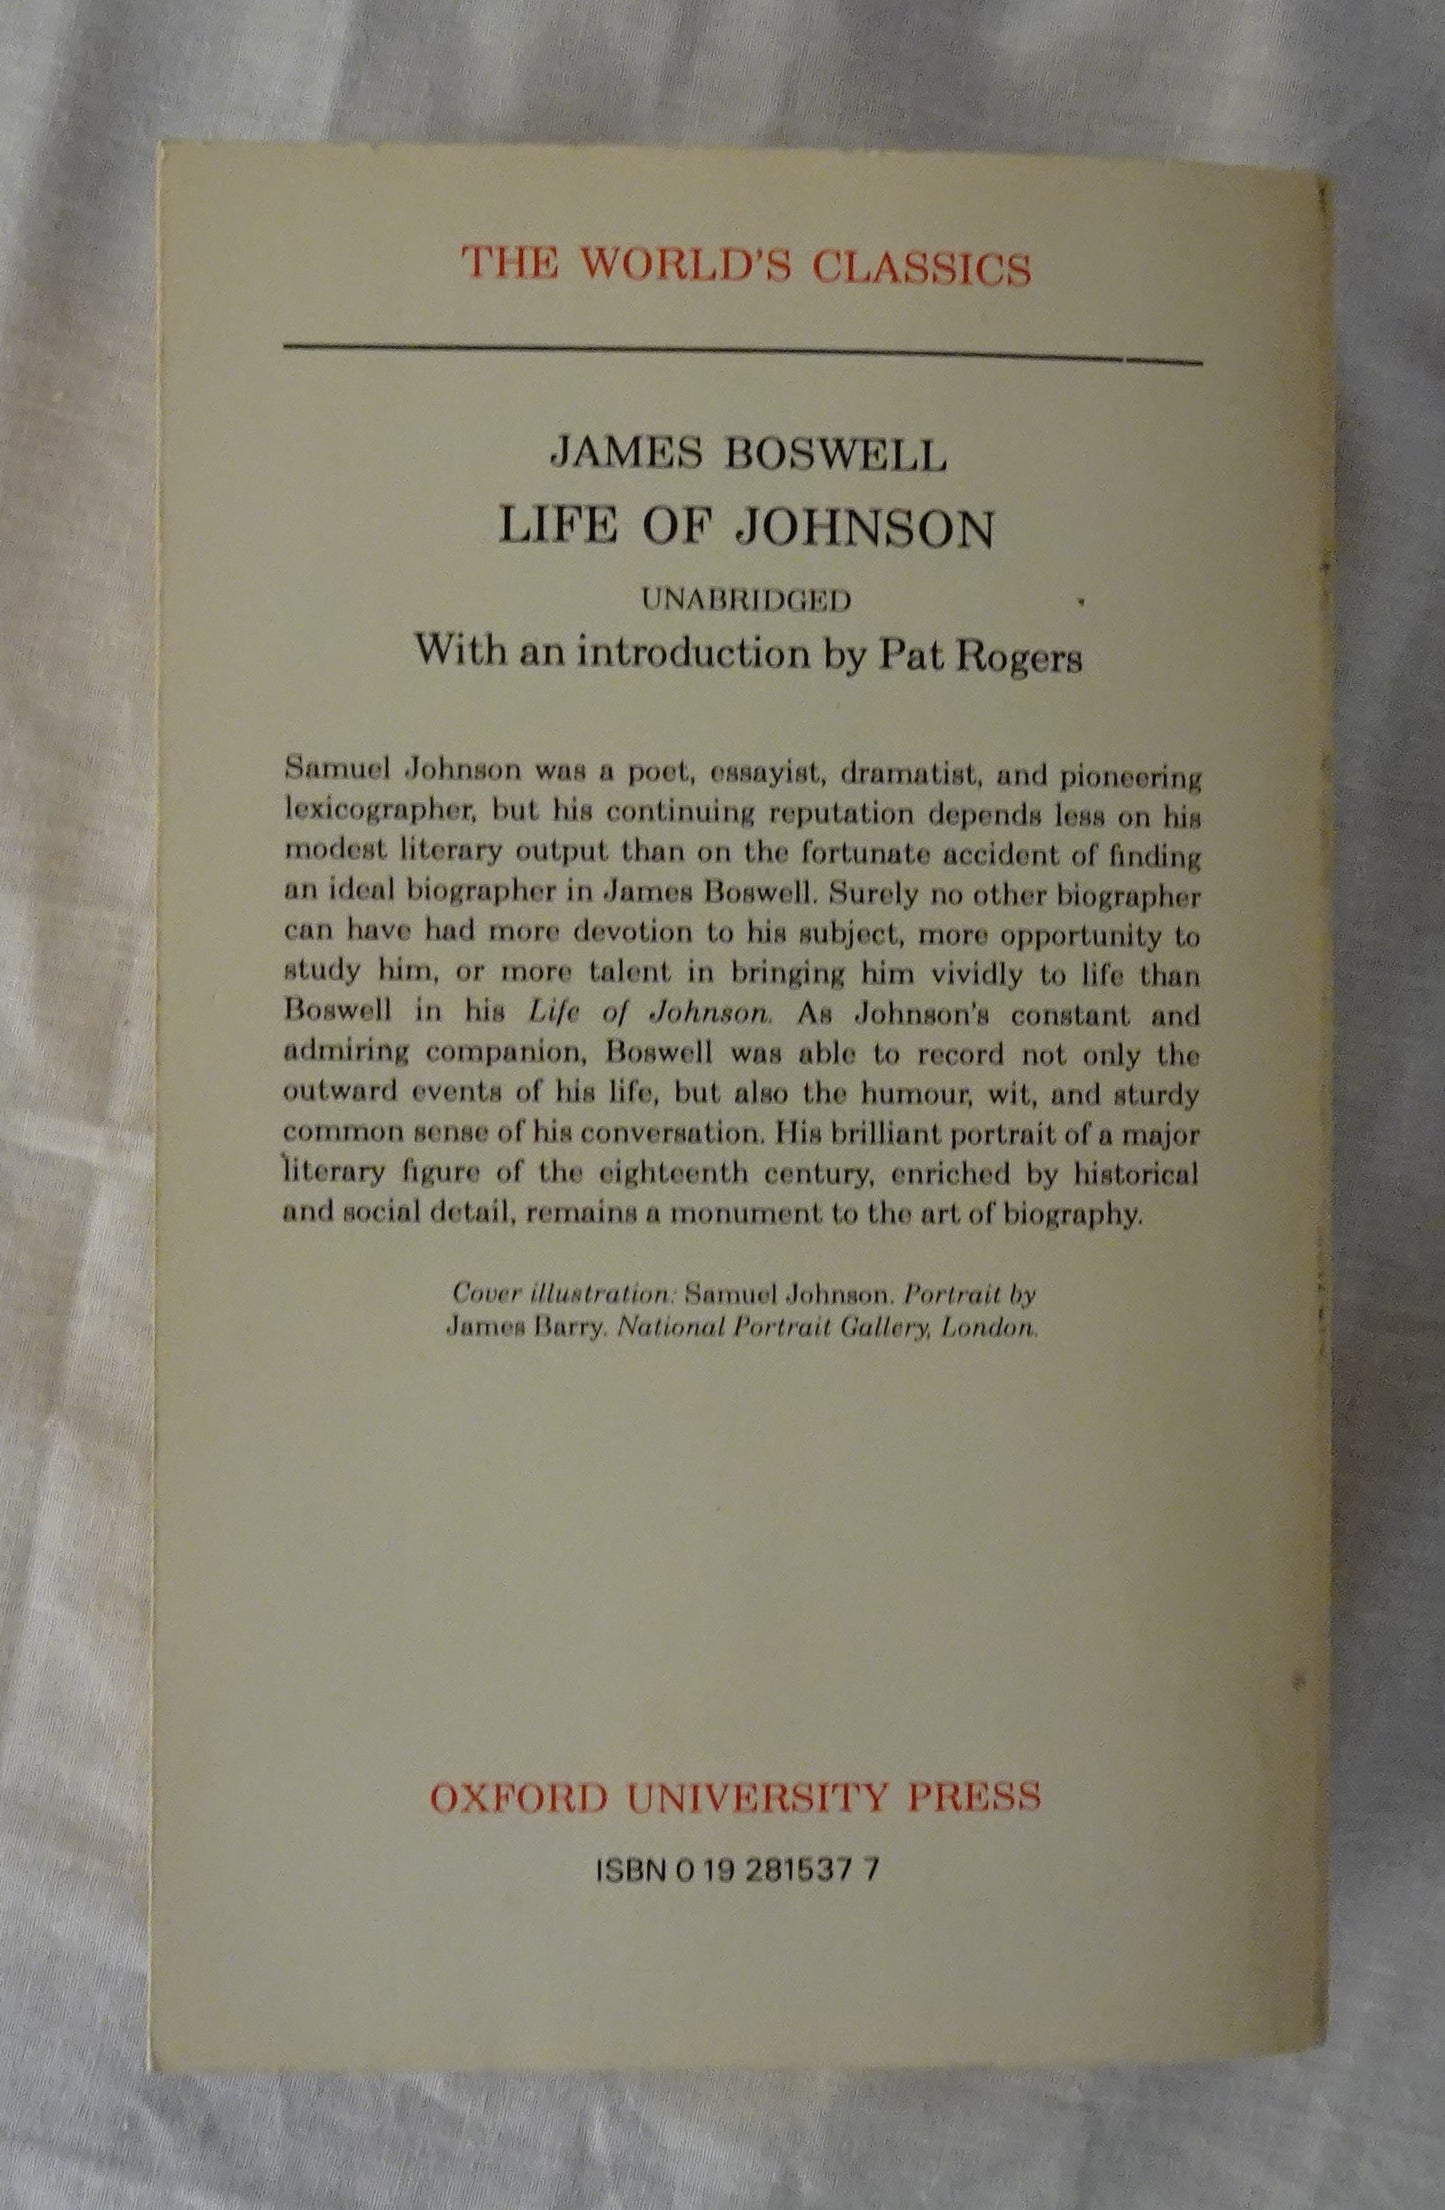 Life of Johnson James Boswell by R. W. Chapman